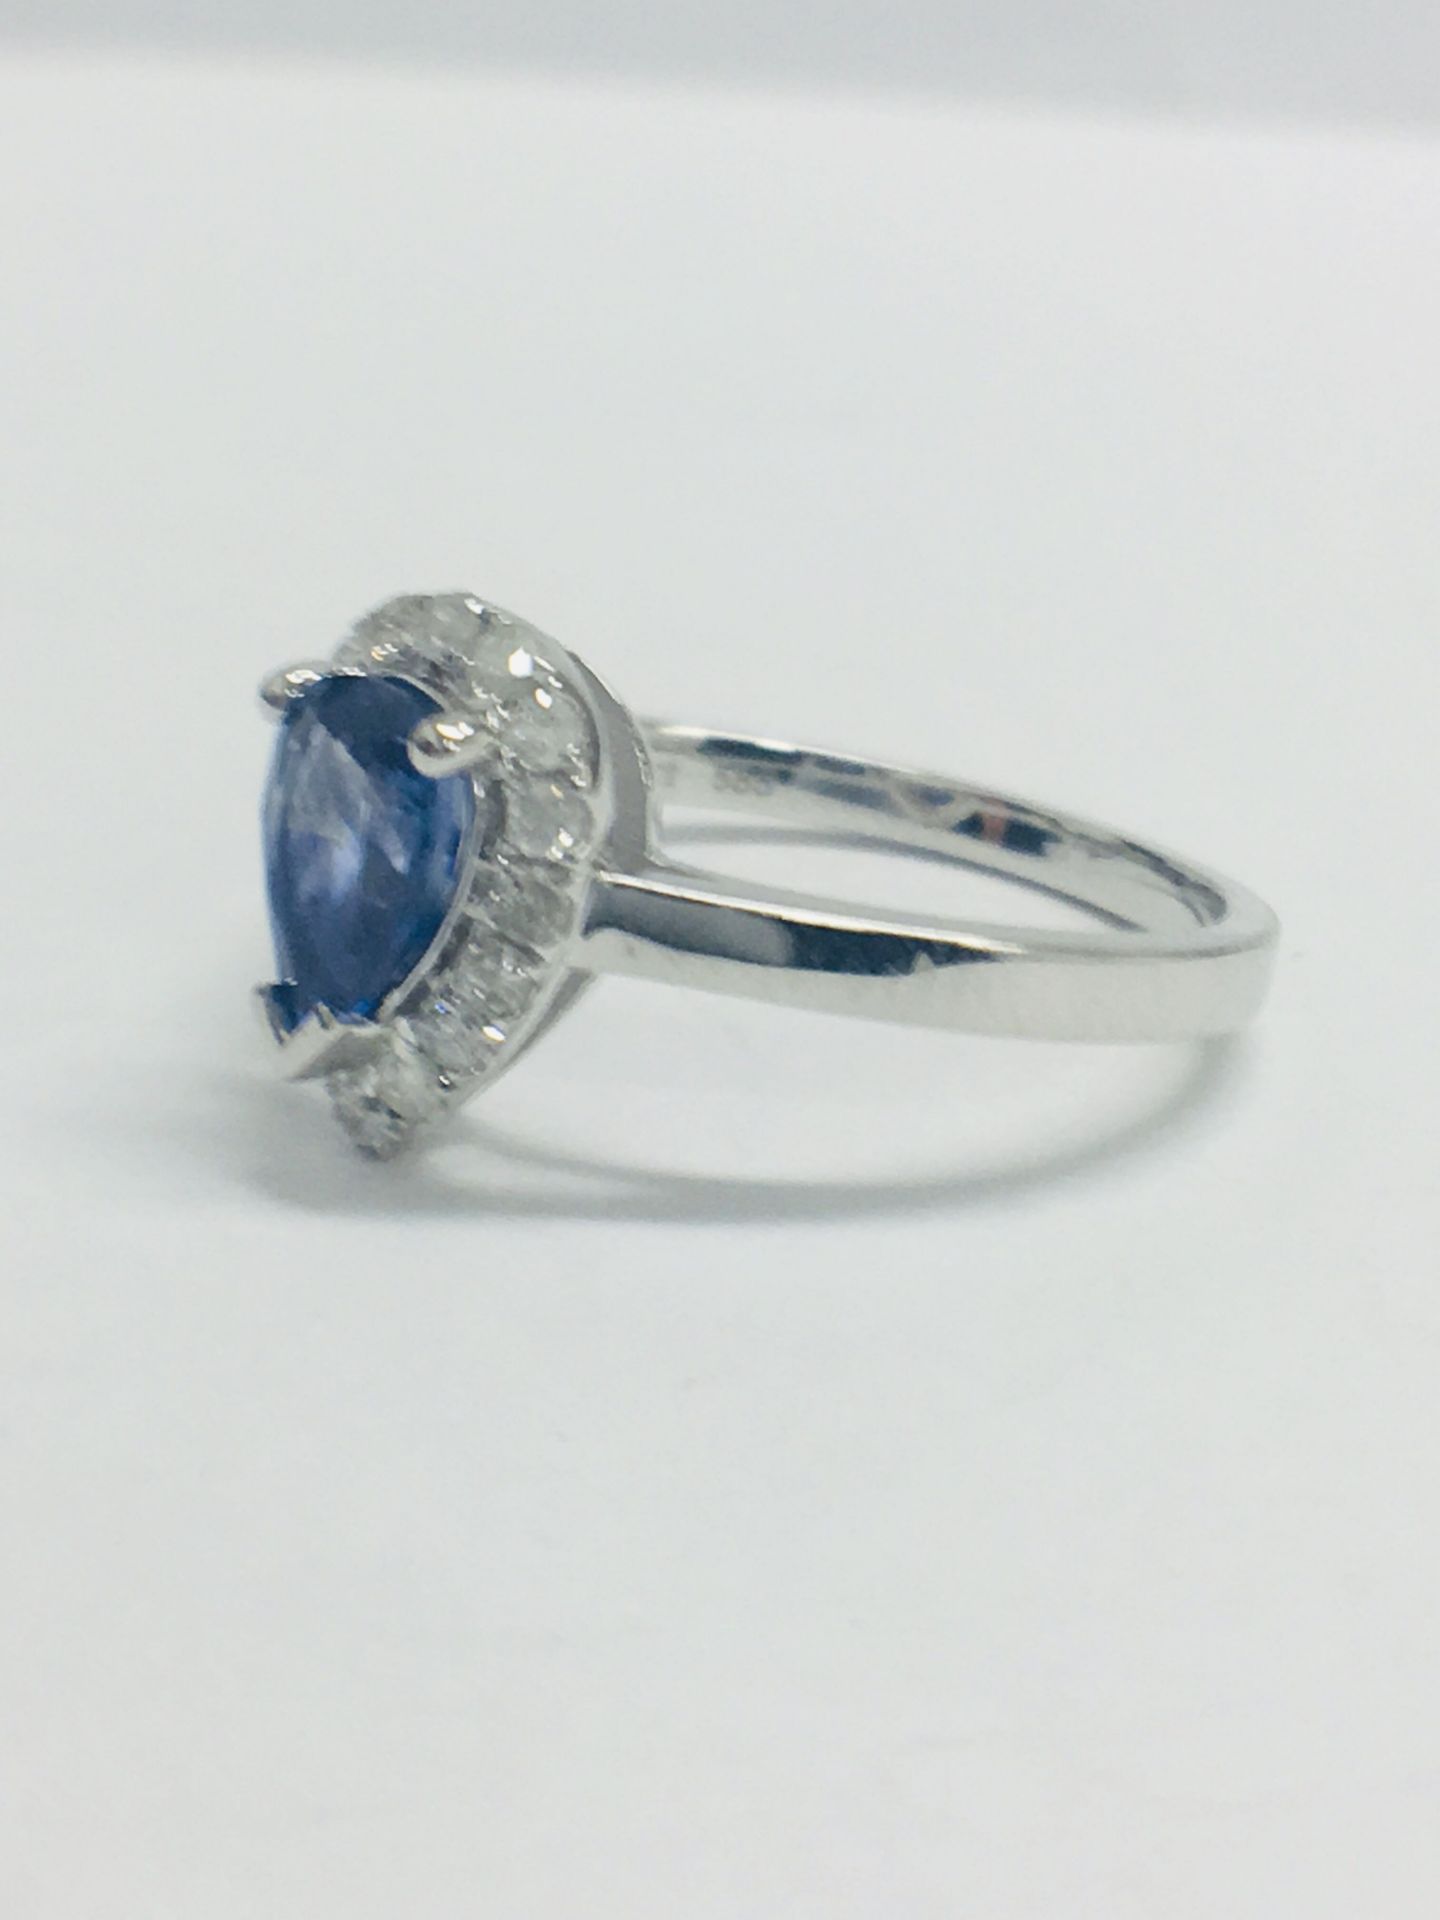 14Ct White Gold Sapphire And Diamond Ring - Image 2 of 10